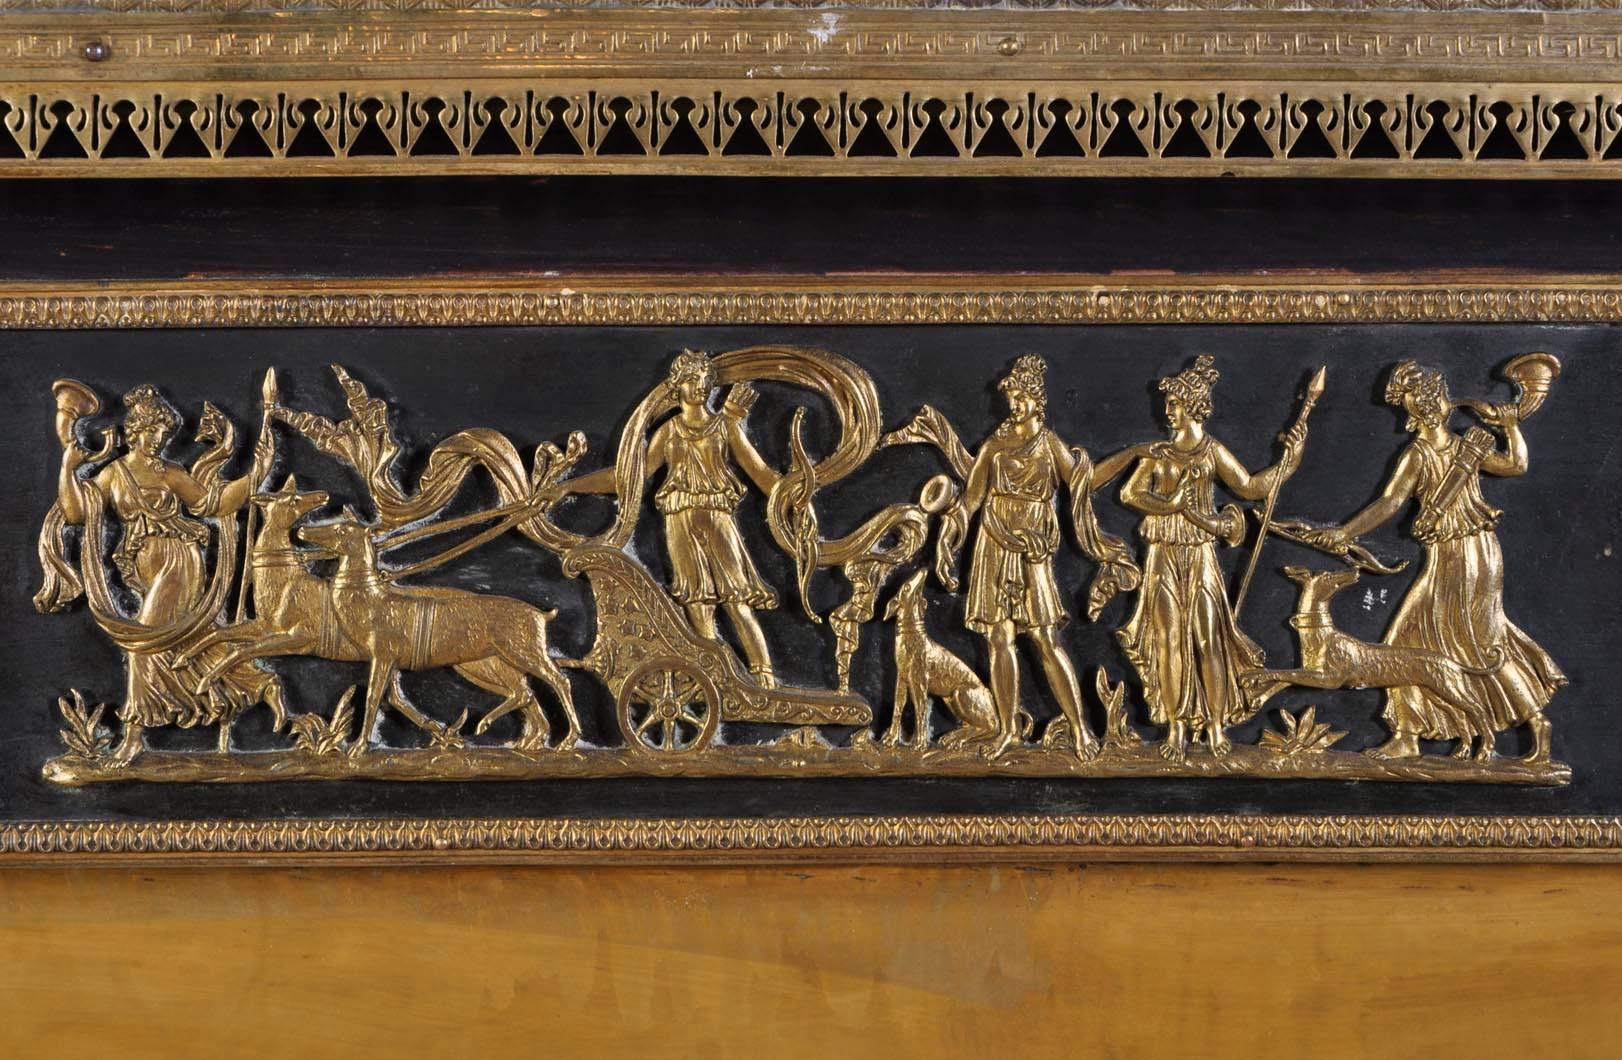 Antique wooden Empire style fireplace with gilt bronze ornaments from the first half of the 19th century.
Stained black wood gives relief to the bronze decorations. The center of the frieze is ornated with a bronze representing a triumph of Diana.